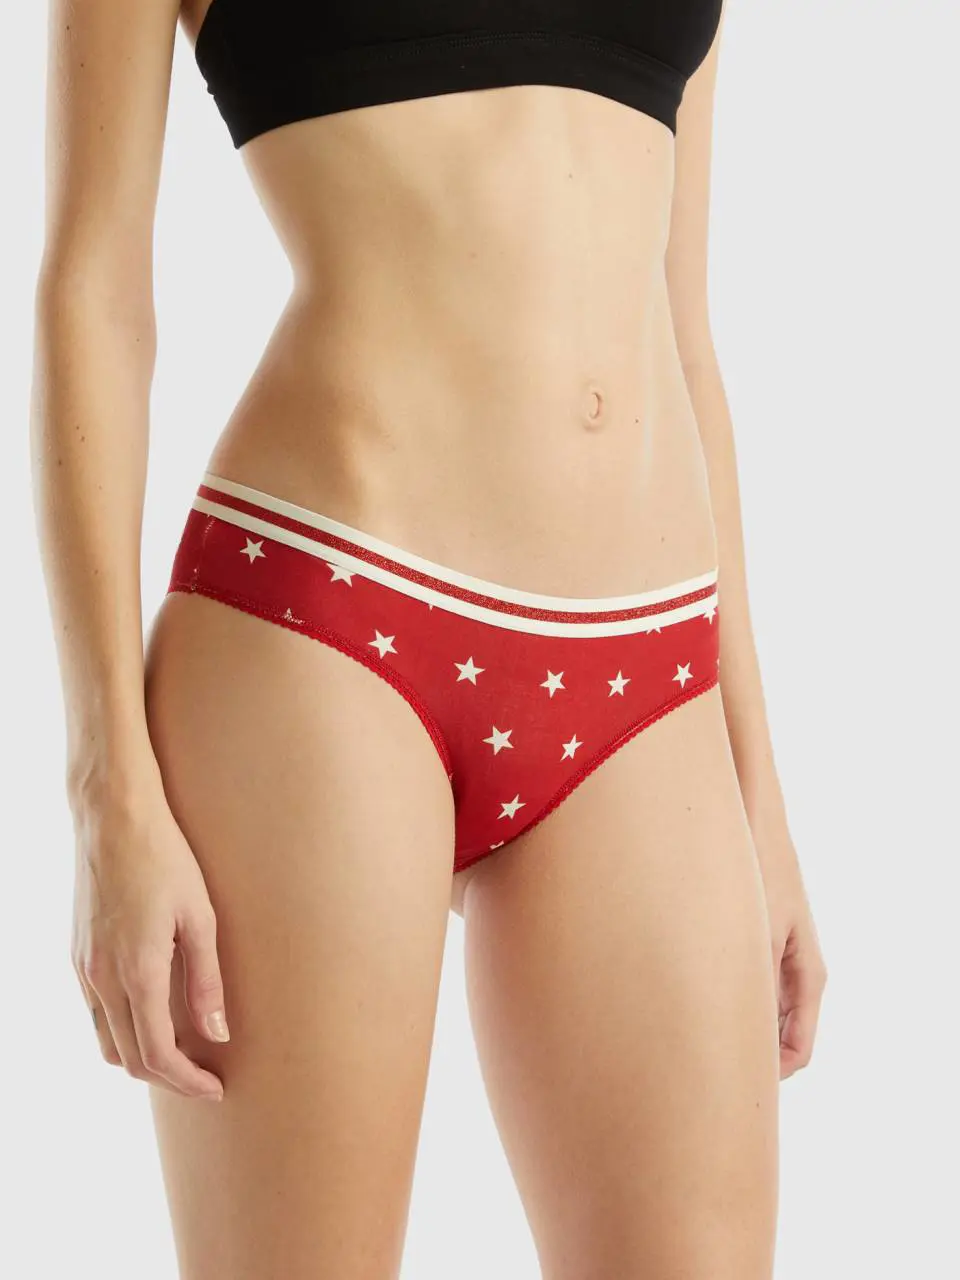 Benetton red briefs with star print. 1